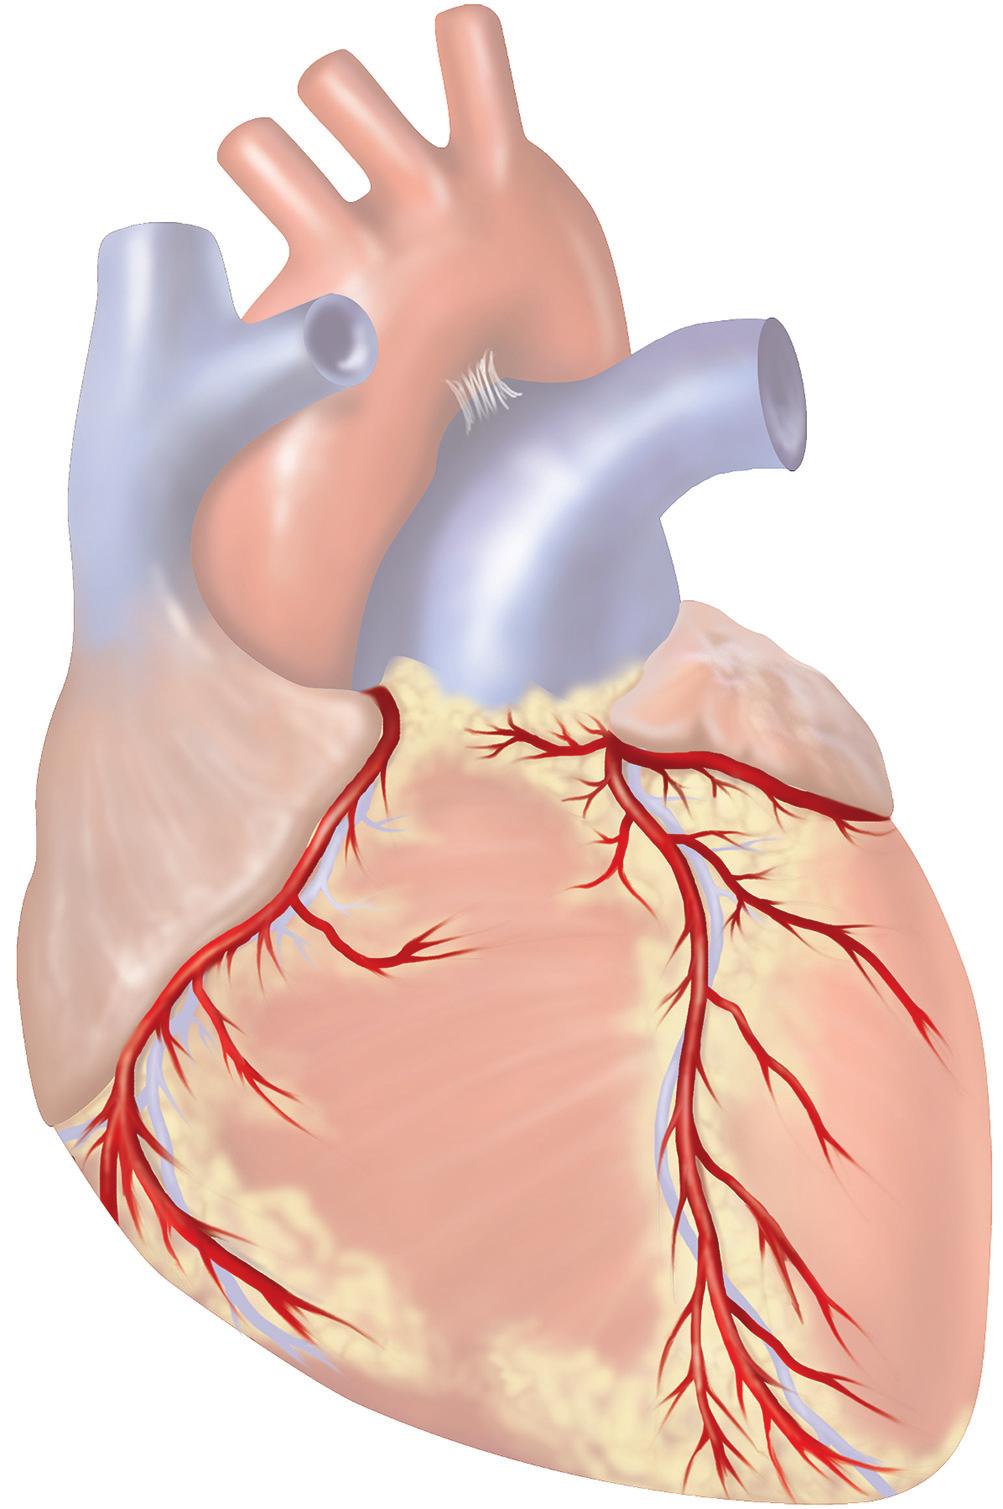 What is a percutaneous coronary intervention?